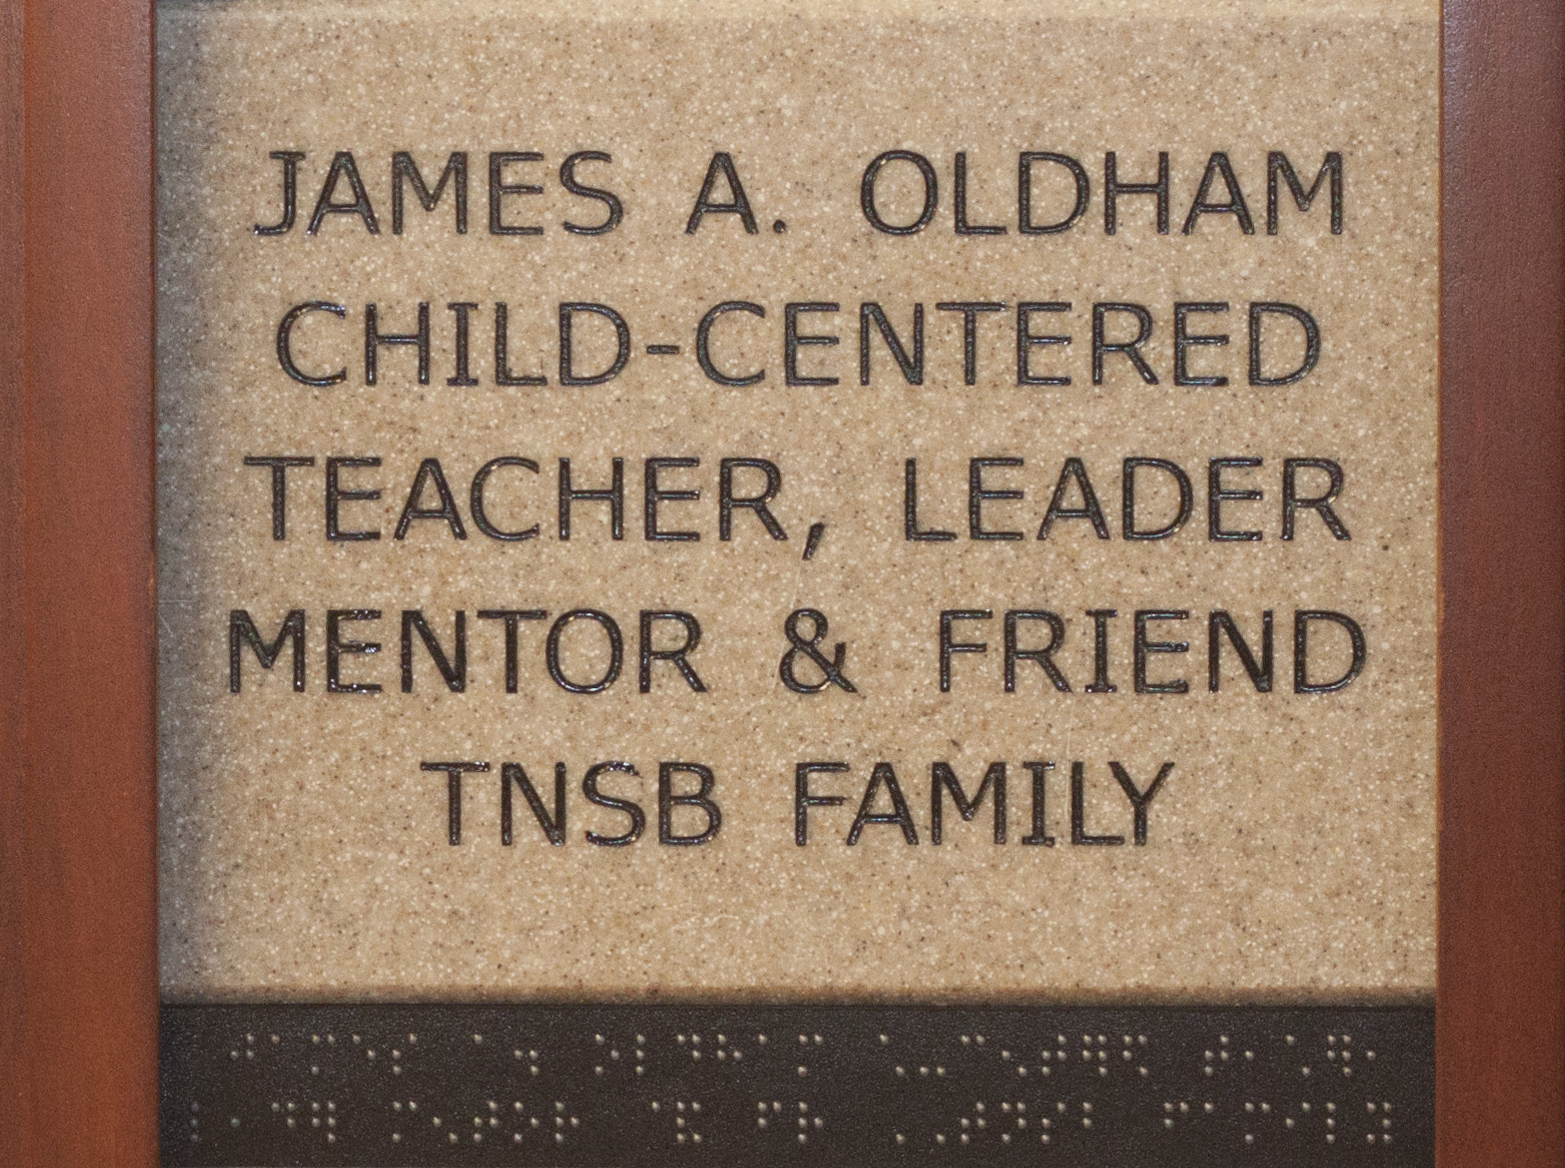 James A. Oldham Child-Centered Teacher, Leader, Mentor and Friend TNSB Family